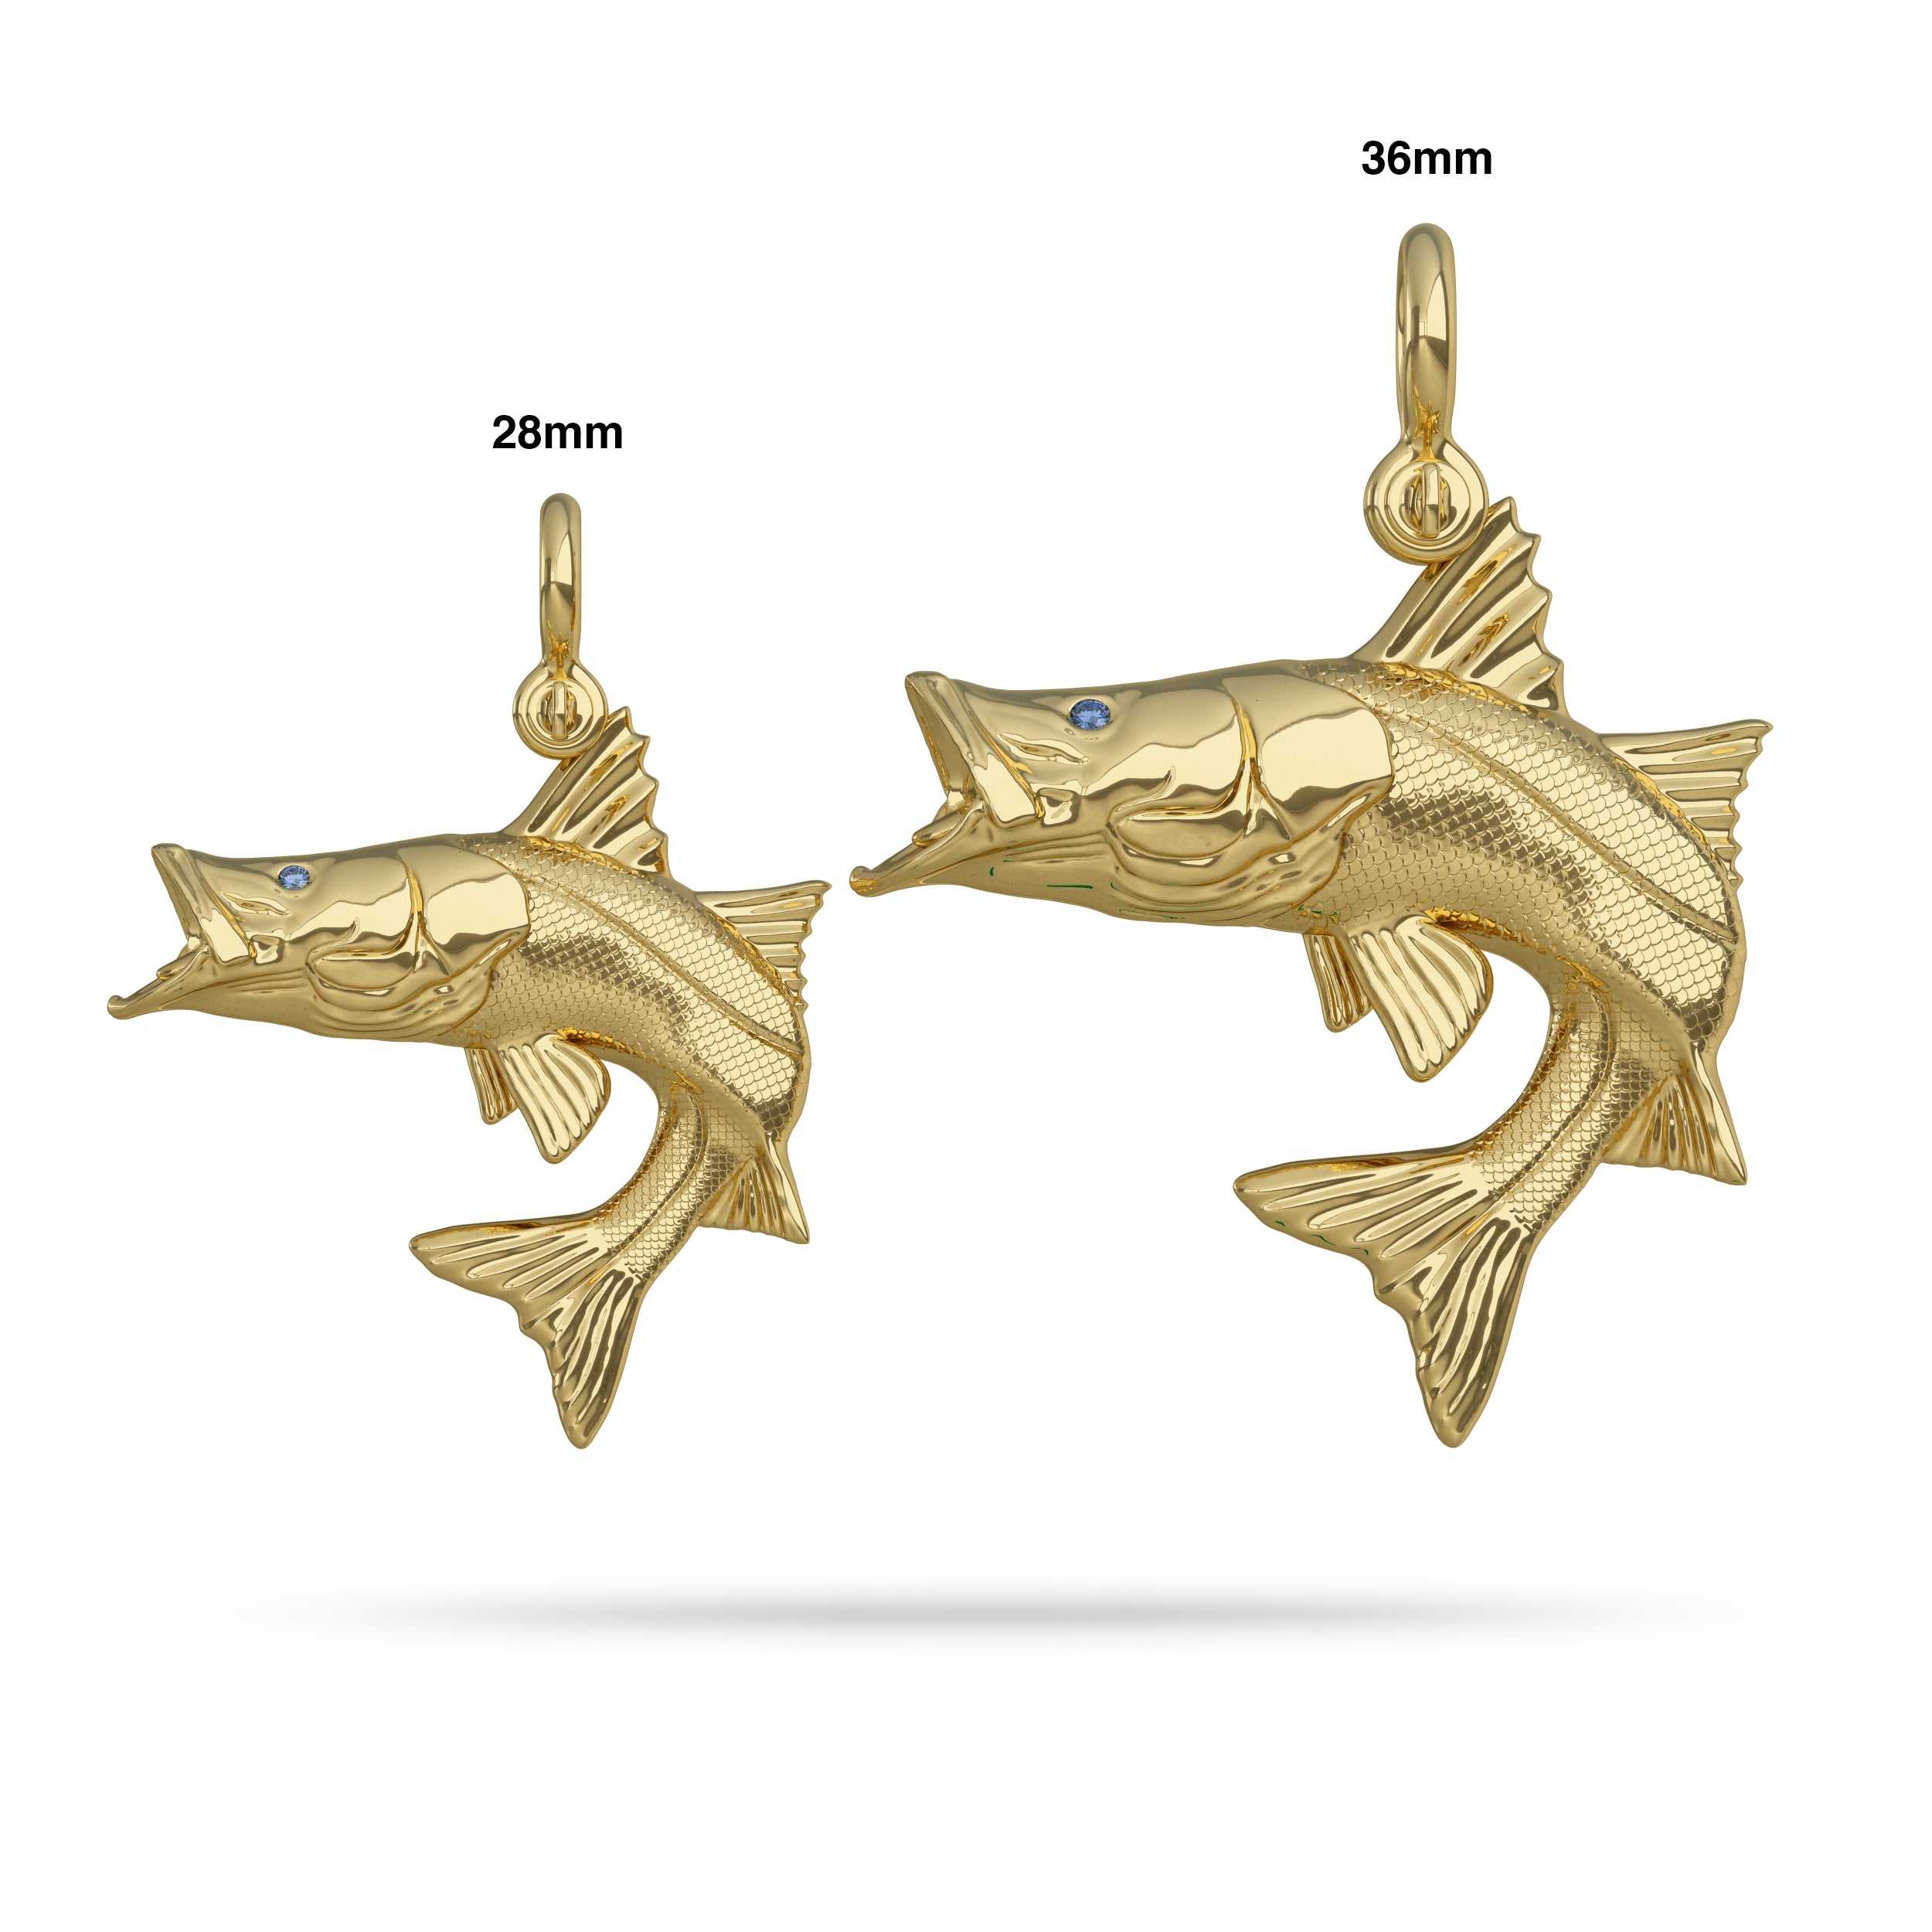 Snook In Action Gold Fish Pendant Size Comparison 